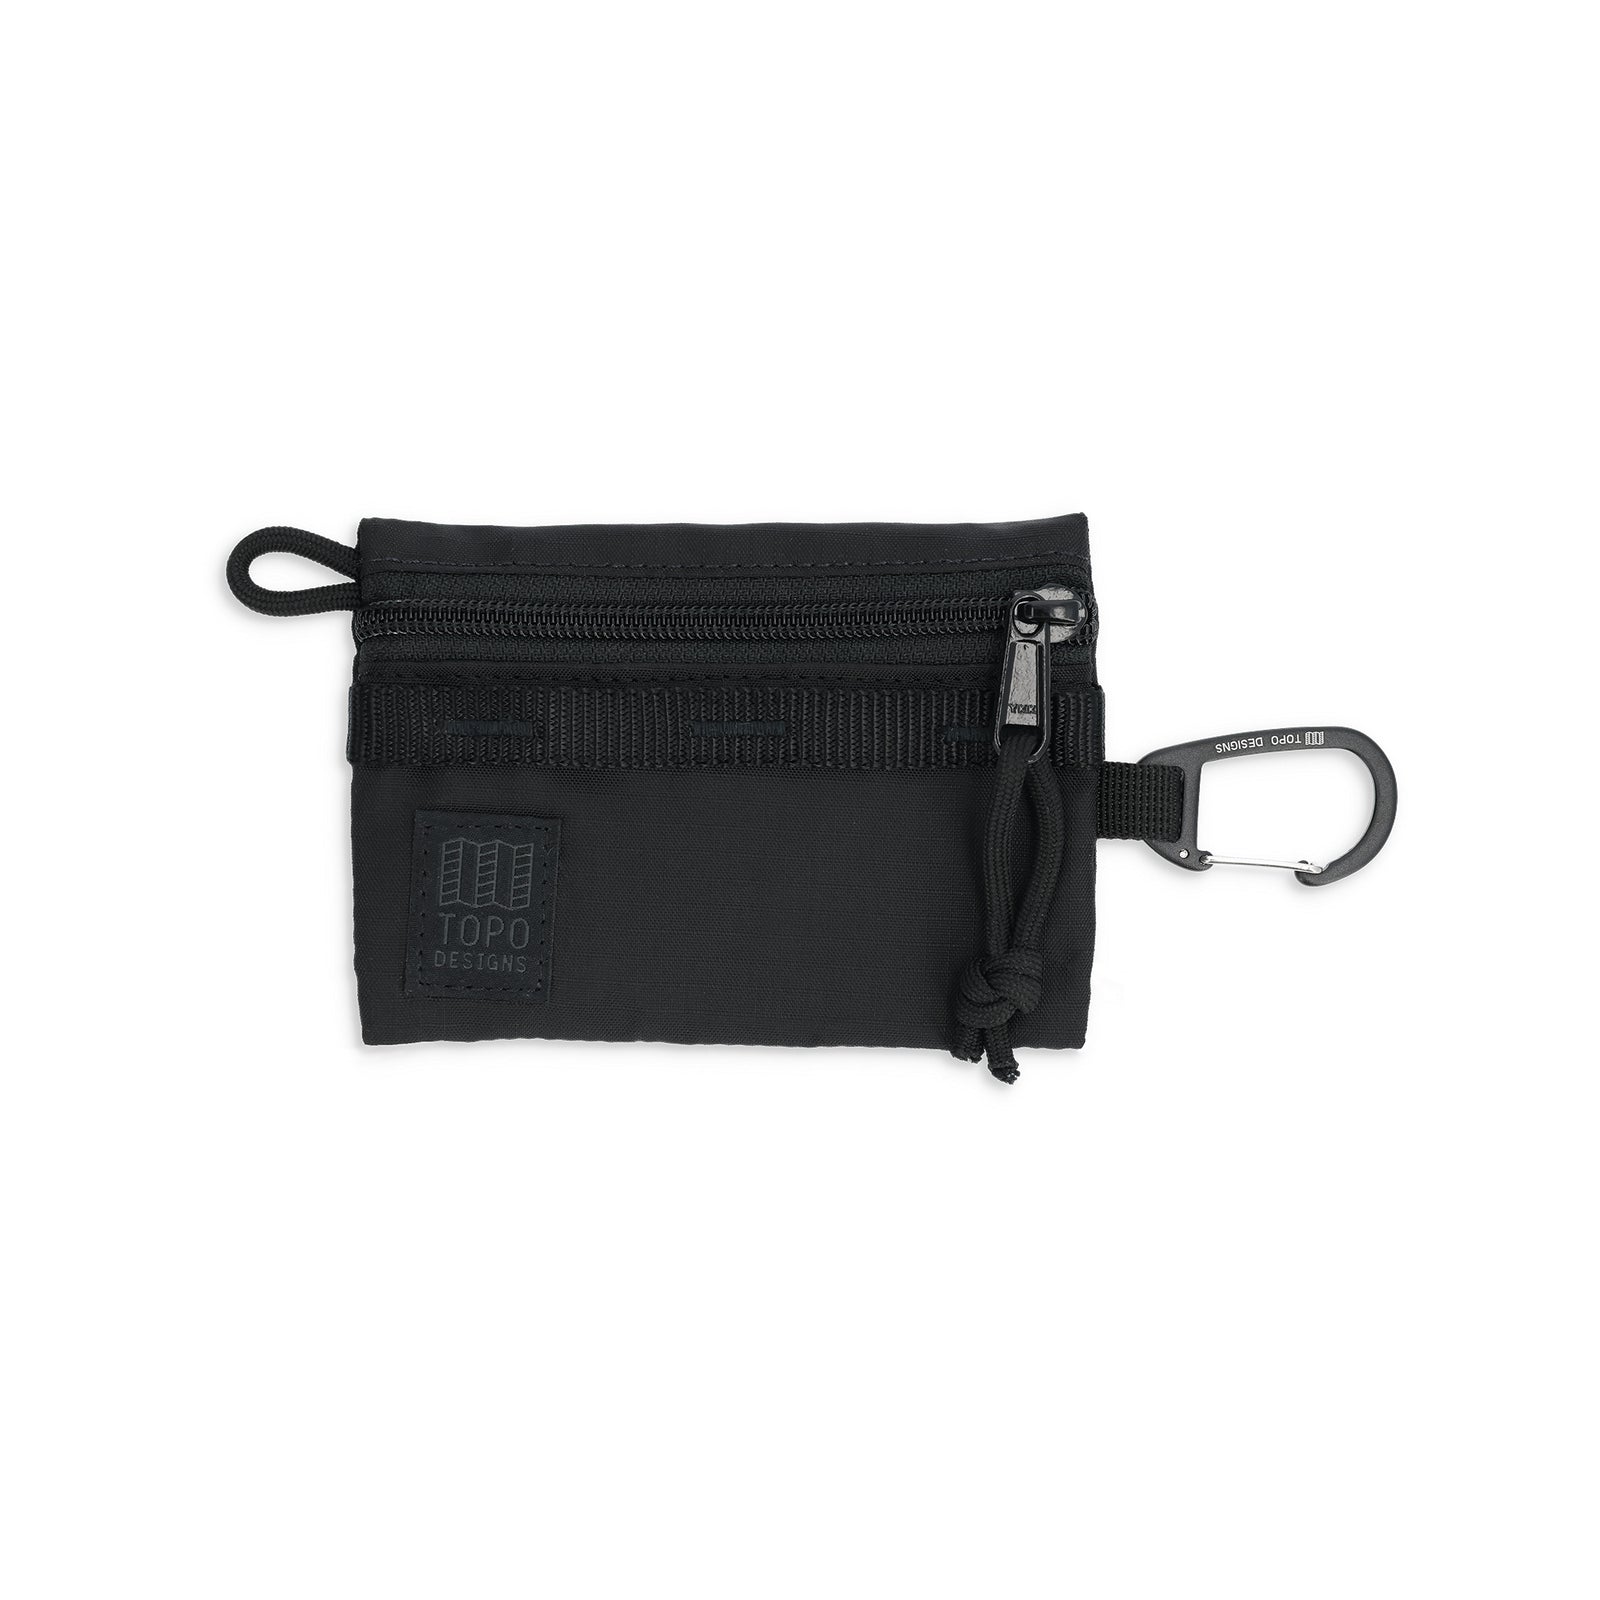 Front View of Topo Designs Mountain Accessory Bag in "Black / Black / Black"